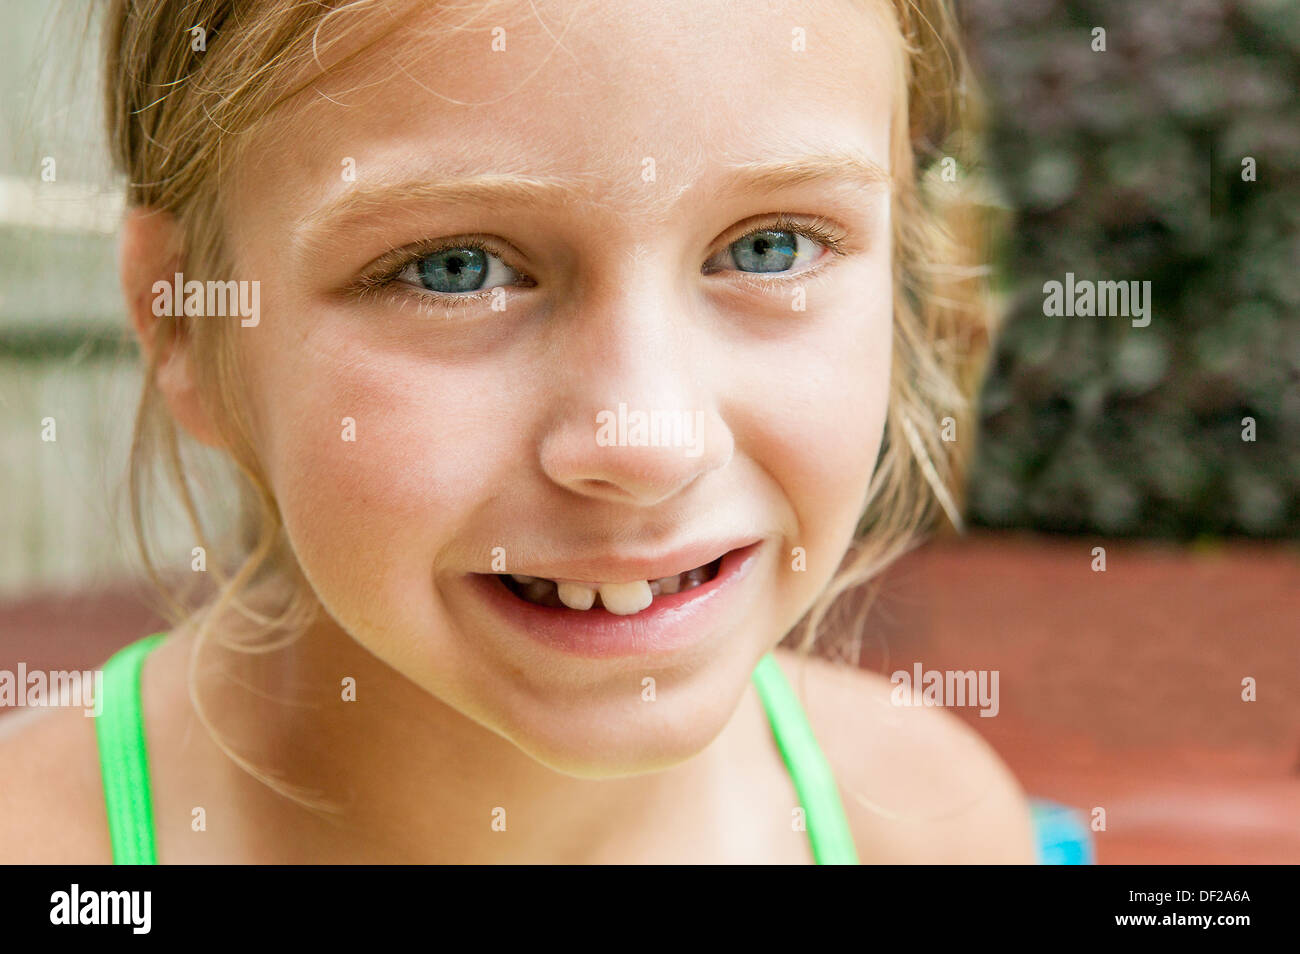 Young Caucasian girl smiling with missing teeth in her upper front jaw. Stock Photo